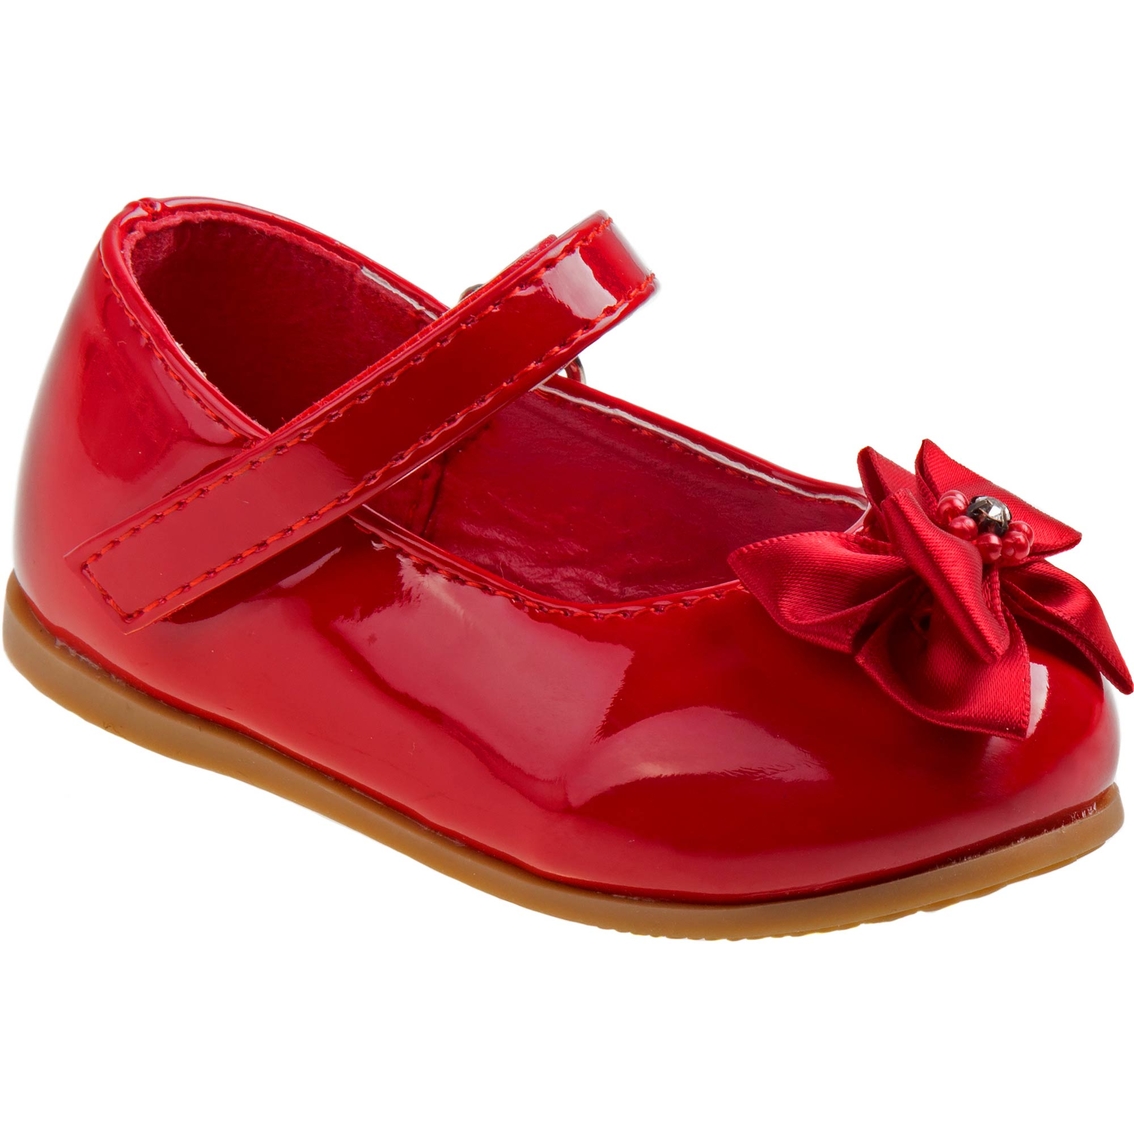 Josmo Infant Girls Patent Dress Shoes 